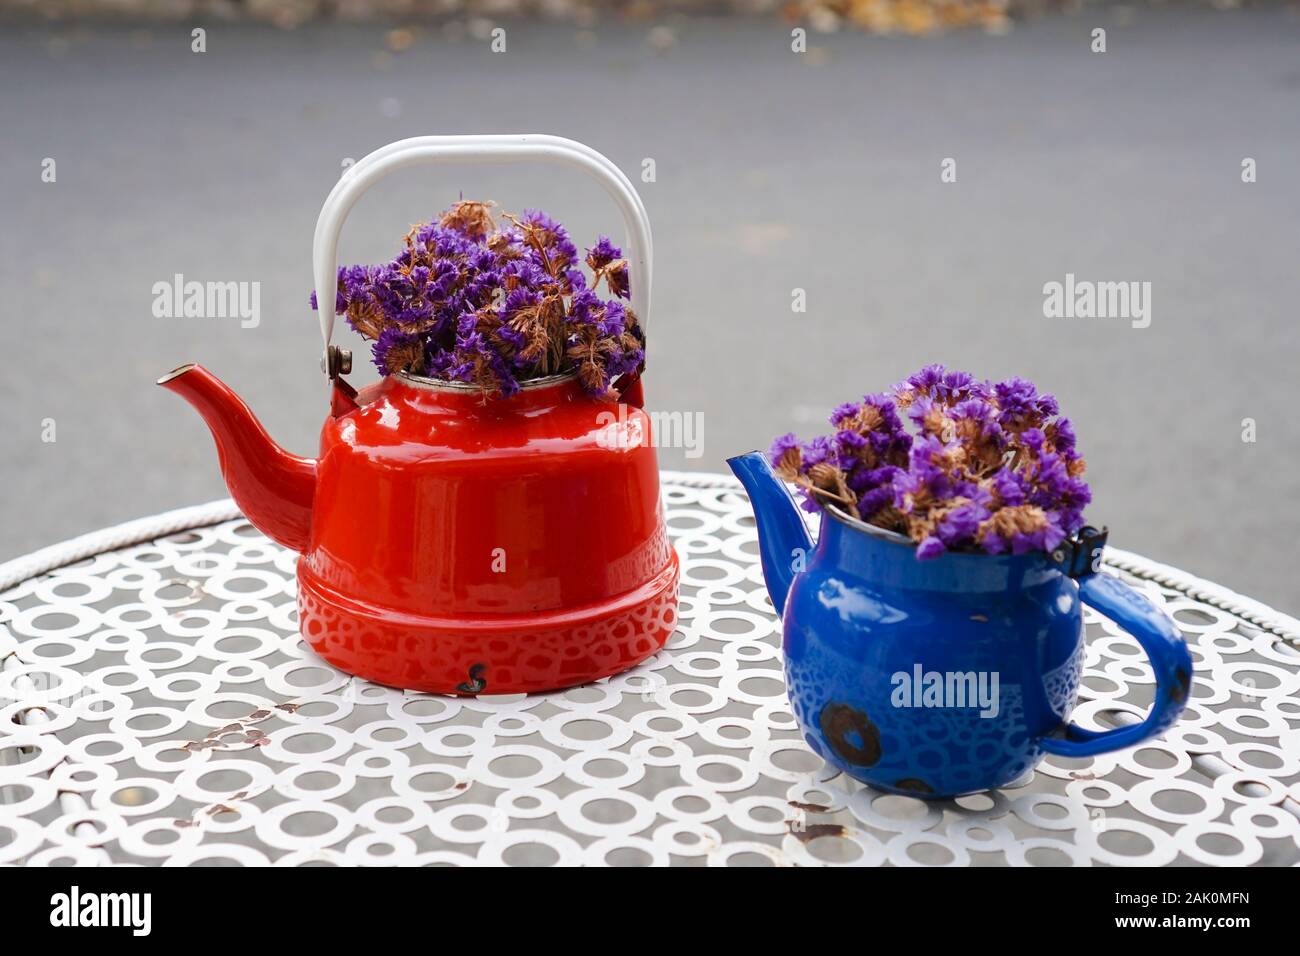 https://c8.alamy.com/comp/2AK0MFN/vintage-teapots-are-on-a-metal-garden-table-with-purple-dry-flowers-inside-as-decorative-objects-2AK0MFN.jpg